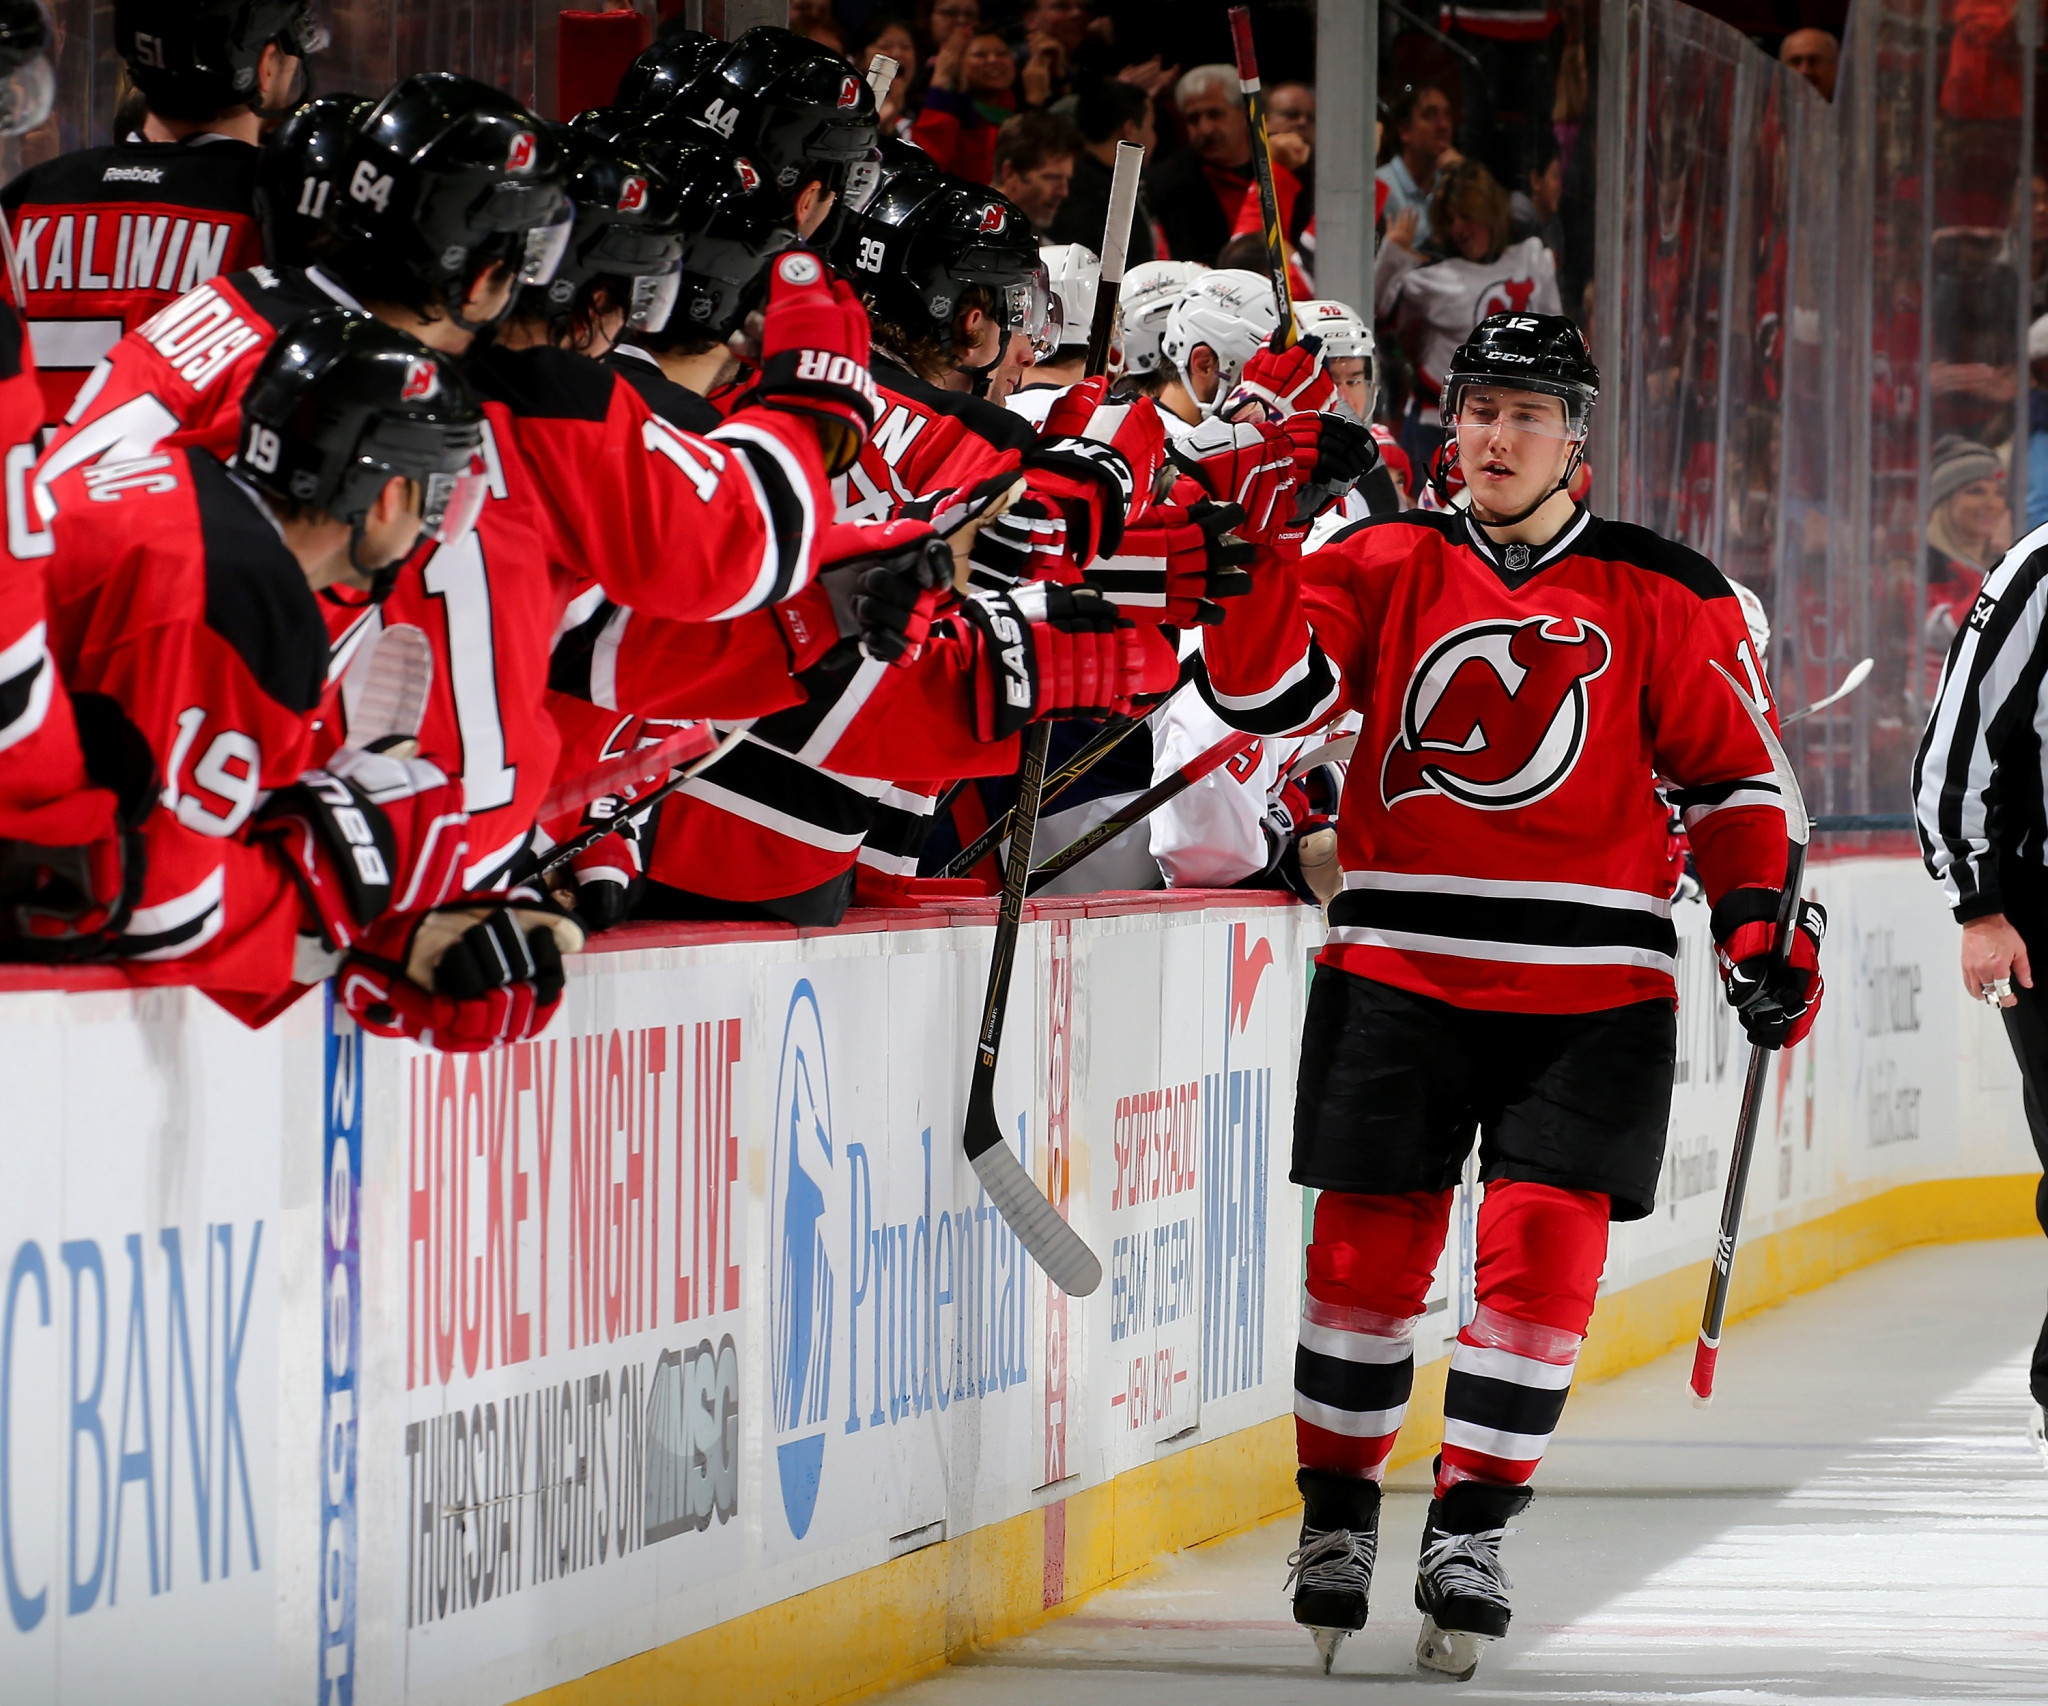 Reid Boucher was drafted by NHL outfit New Jersey Devils in 2011 ©Getty Images